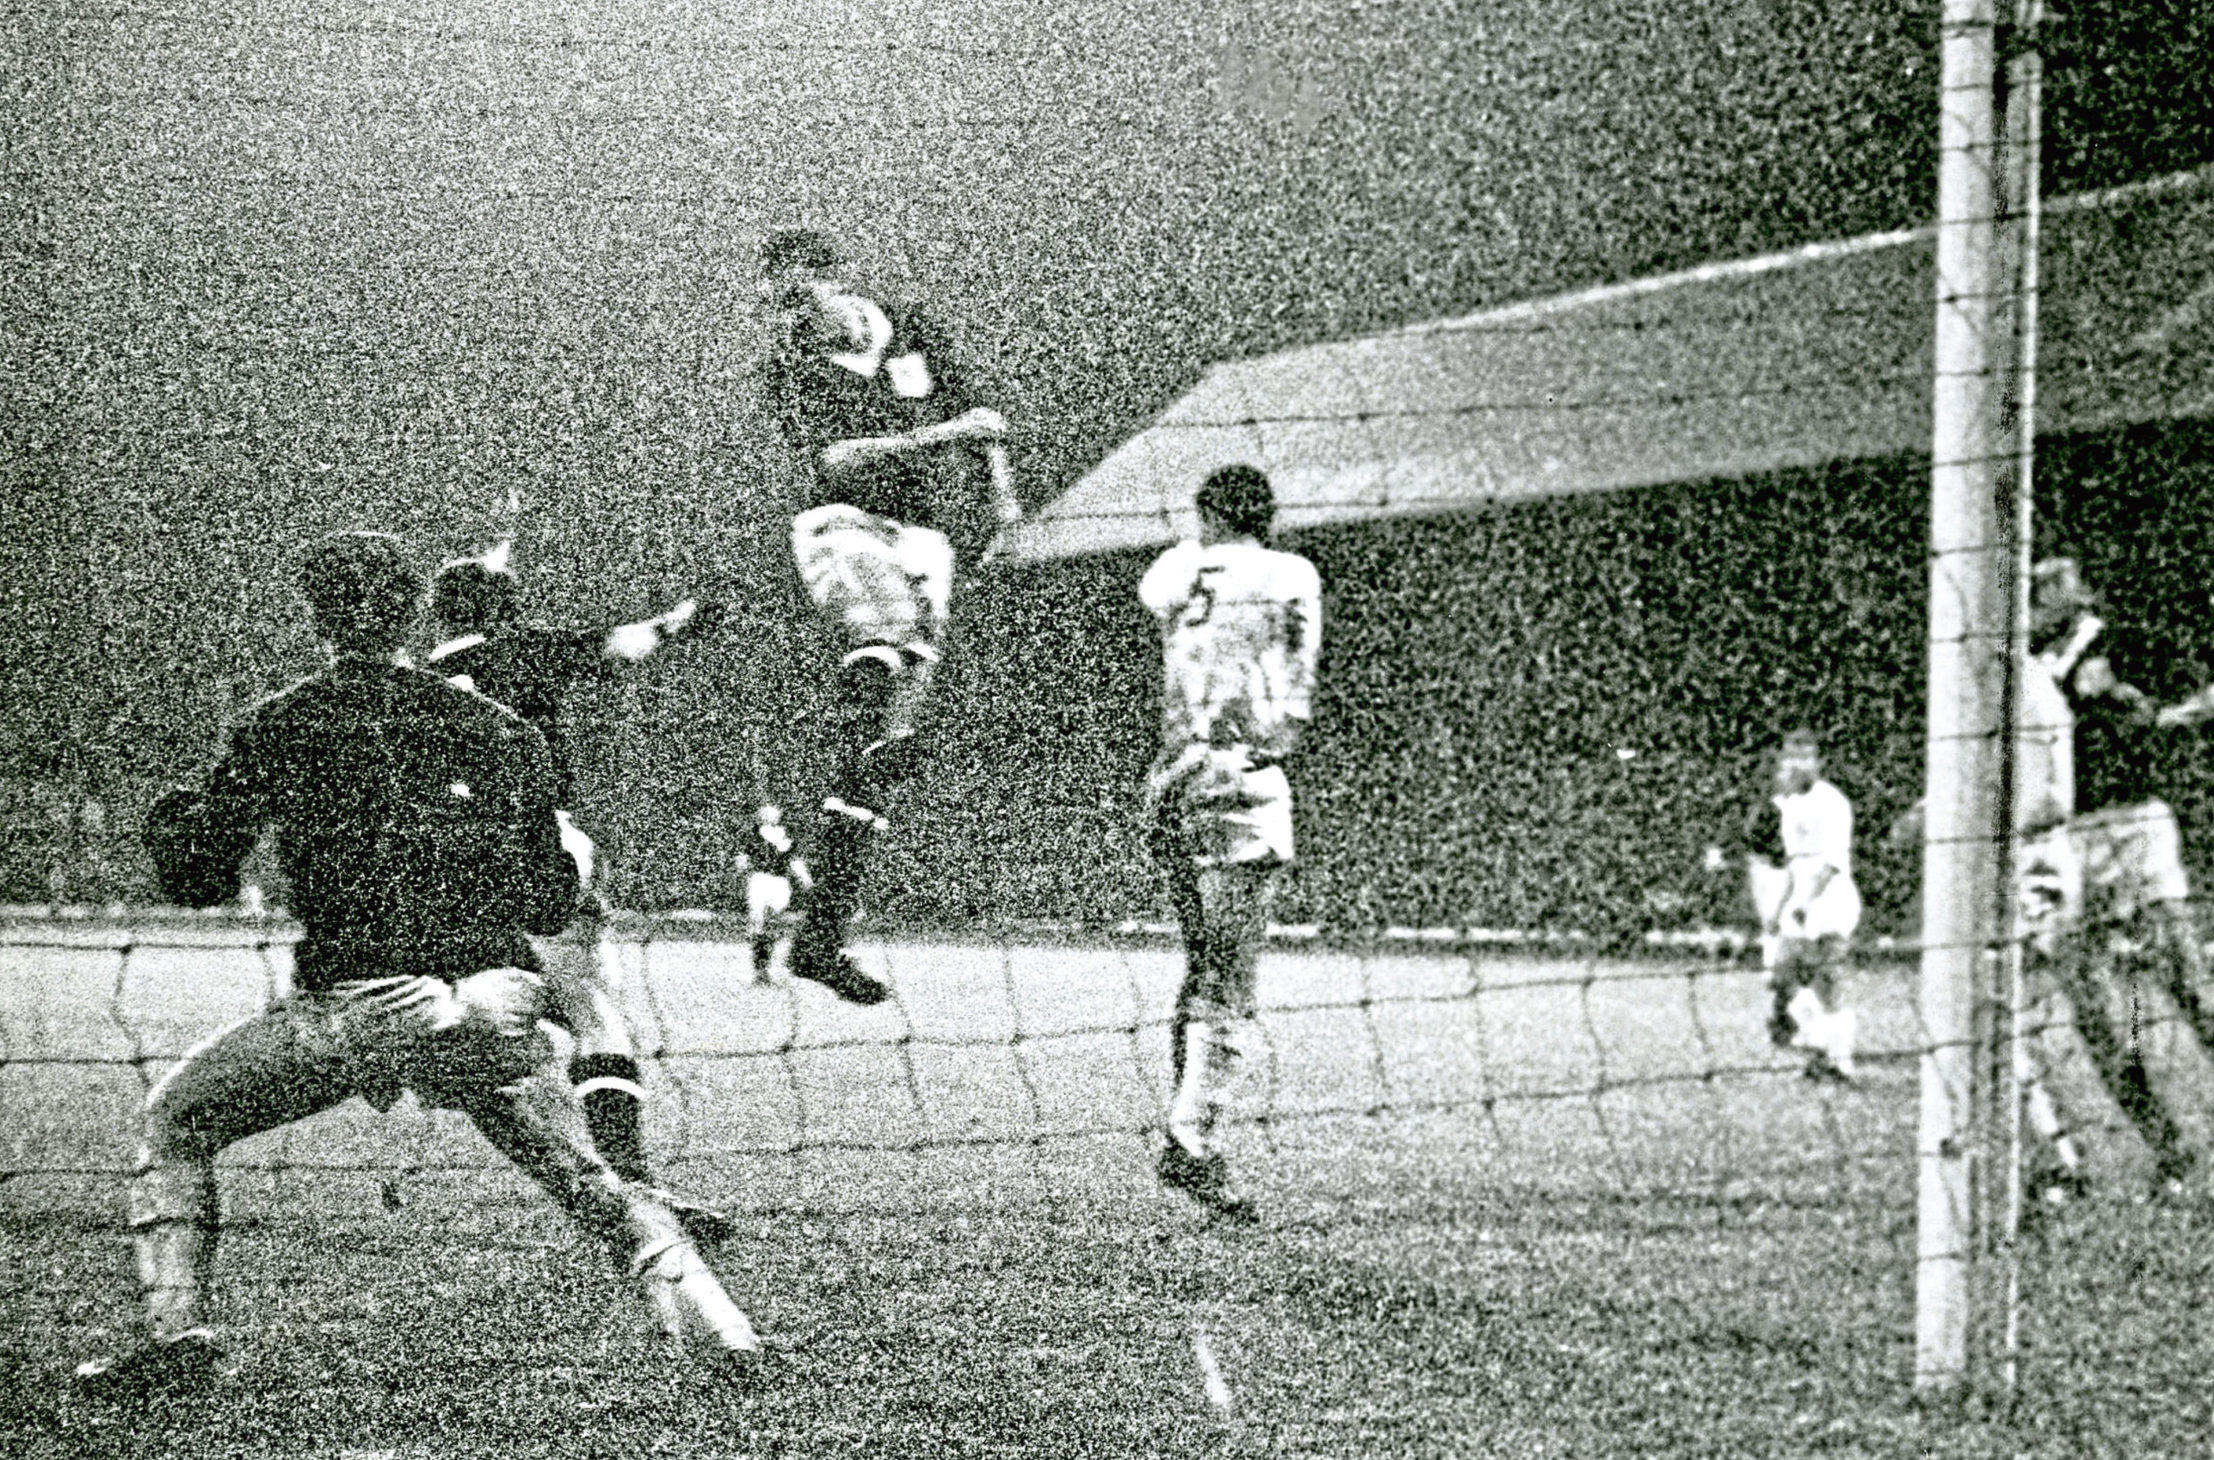 Alan Gilzean narrowly misses a header against FC Cologne in 1962.